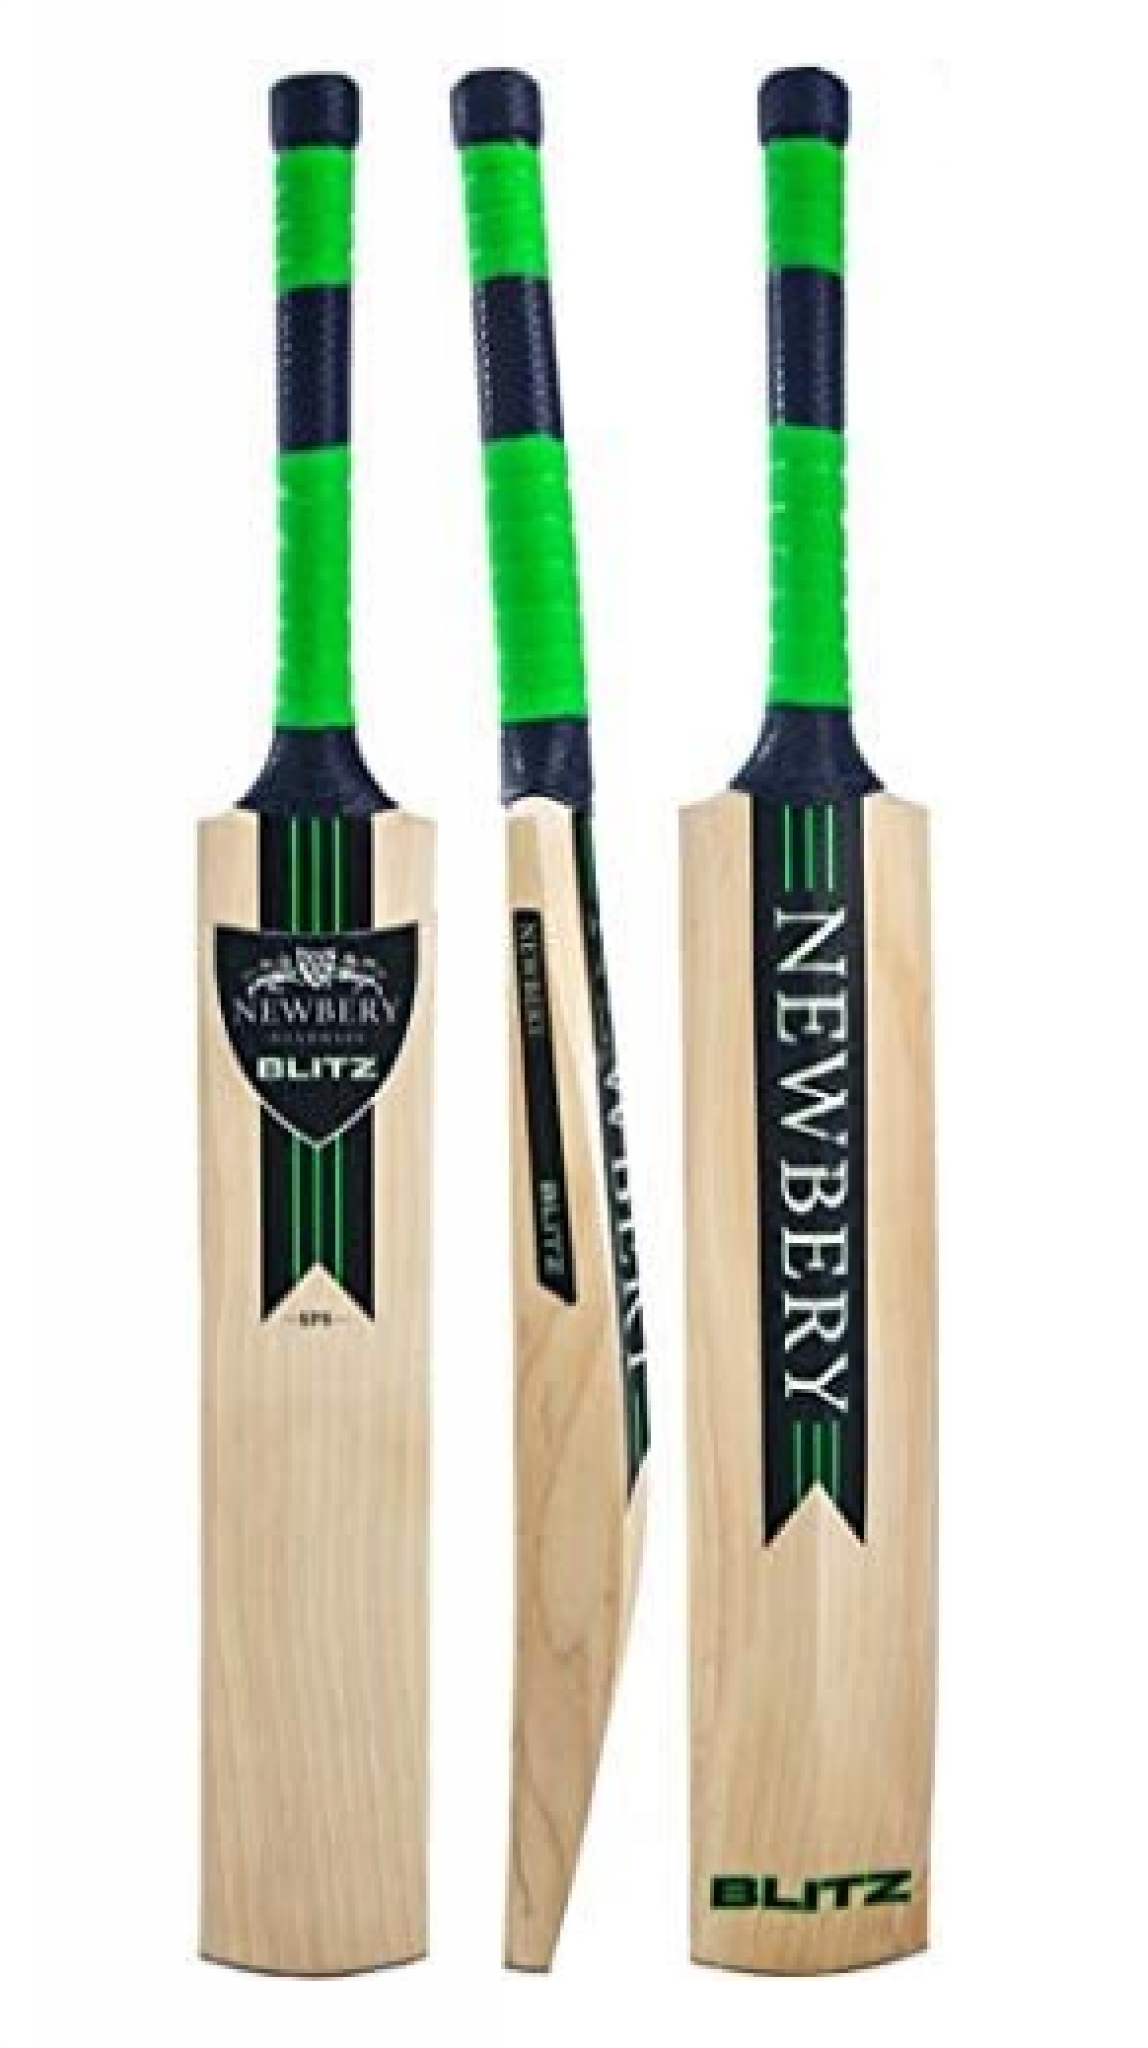 Top 10 Best Cricket Bats in 2022 Reviews, Comparisons & Buyers Guide